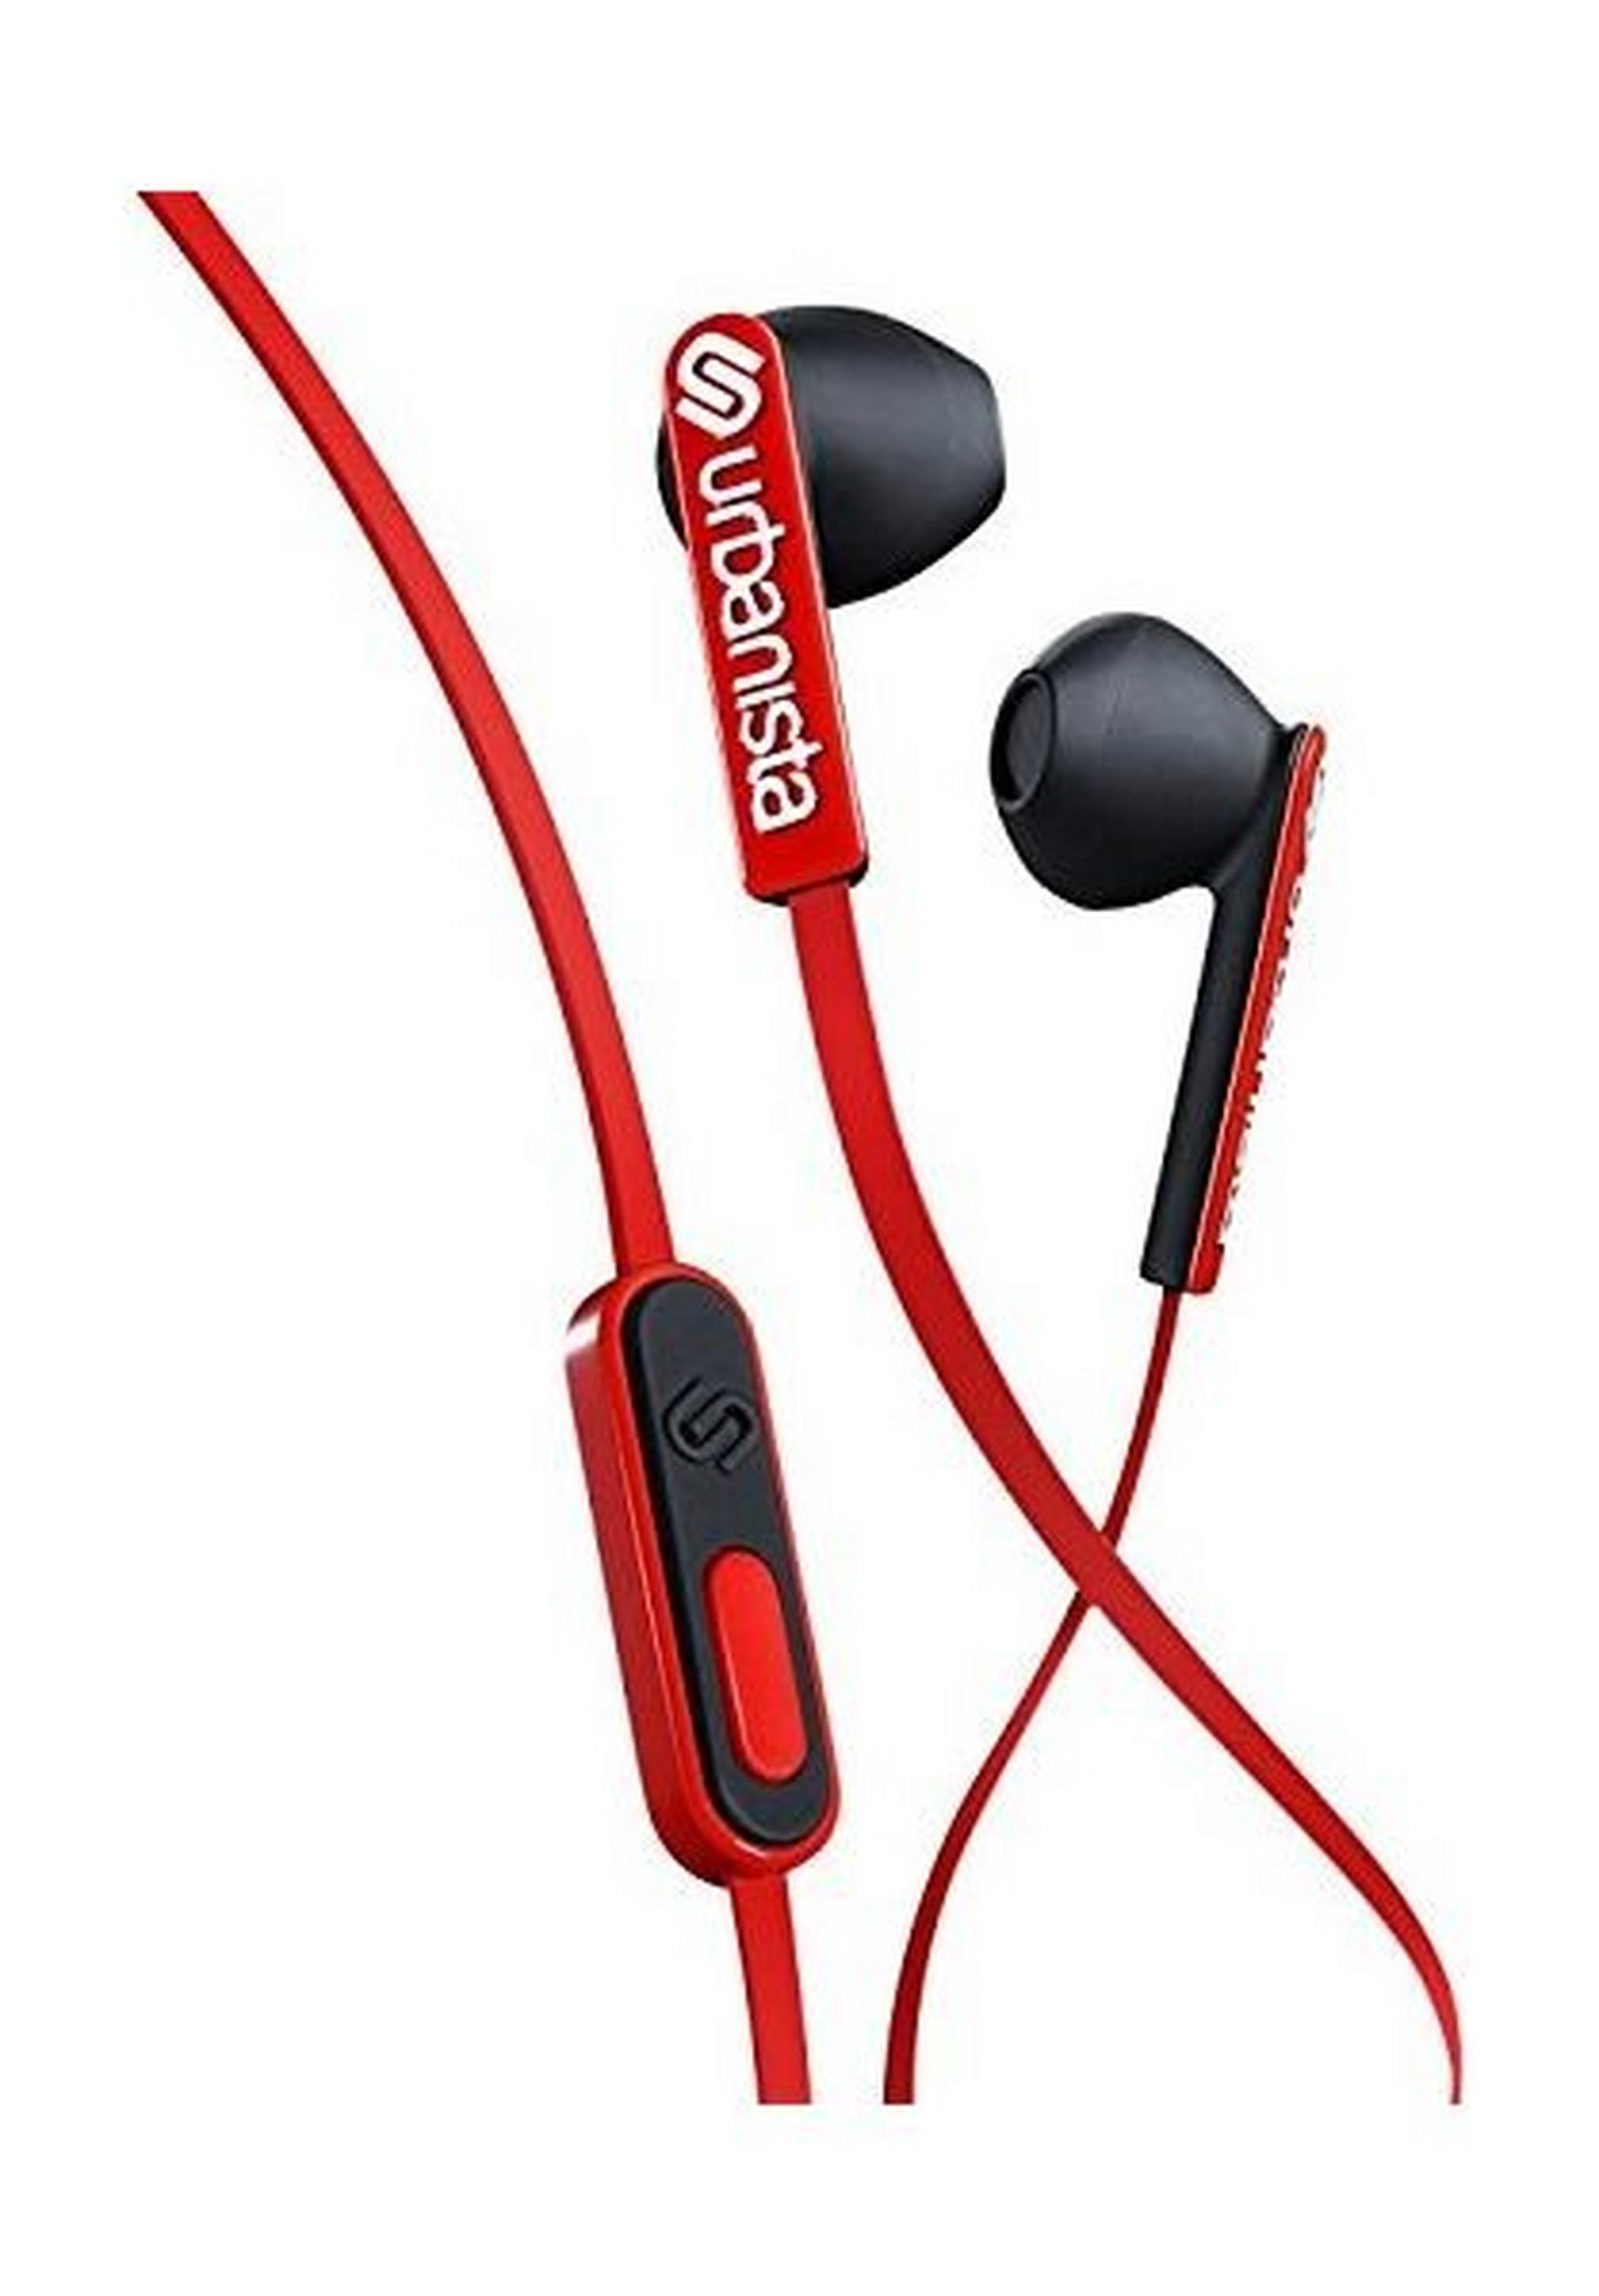 Urbanista San Francisco Wired In-ear Earphones with Mic URB-1032501 - Red